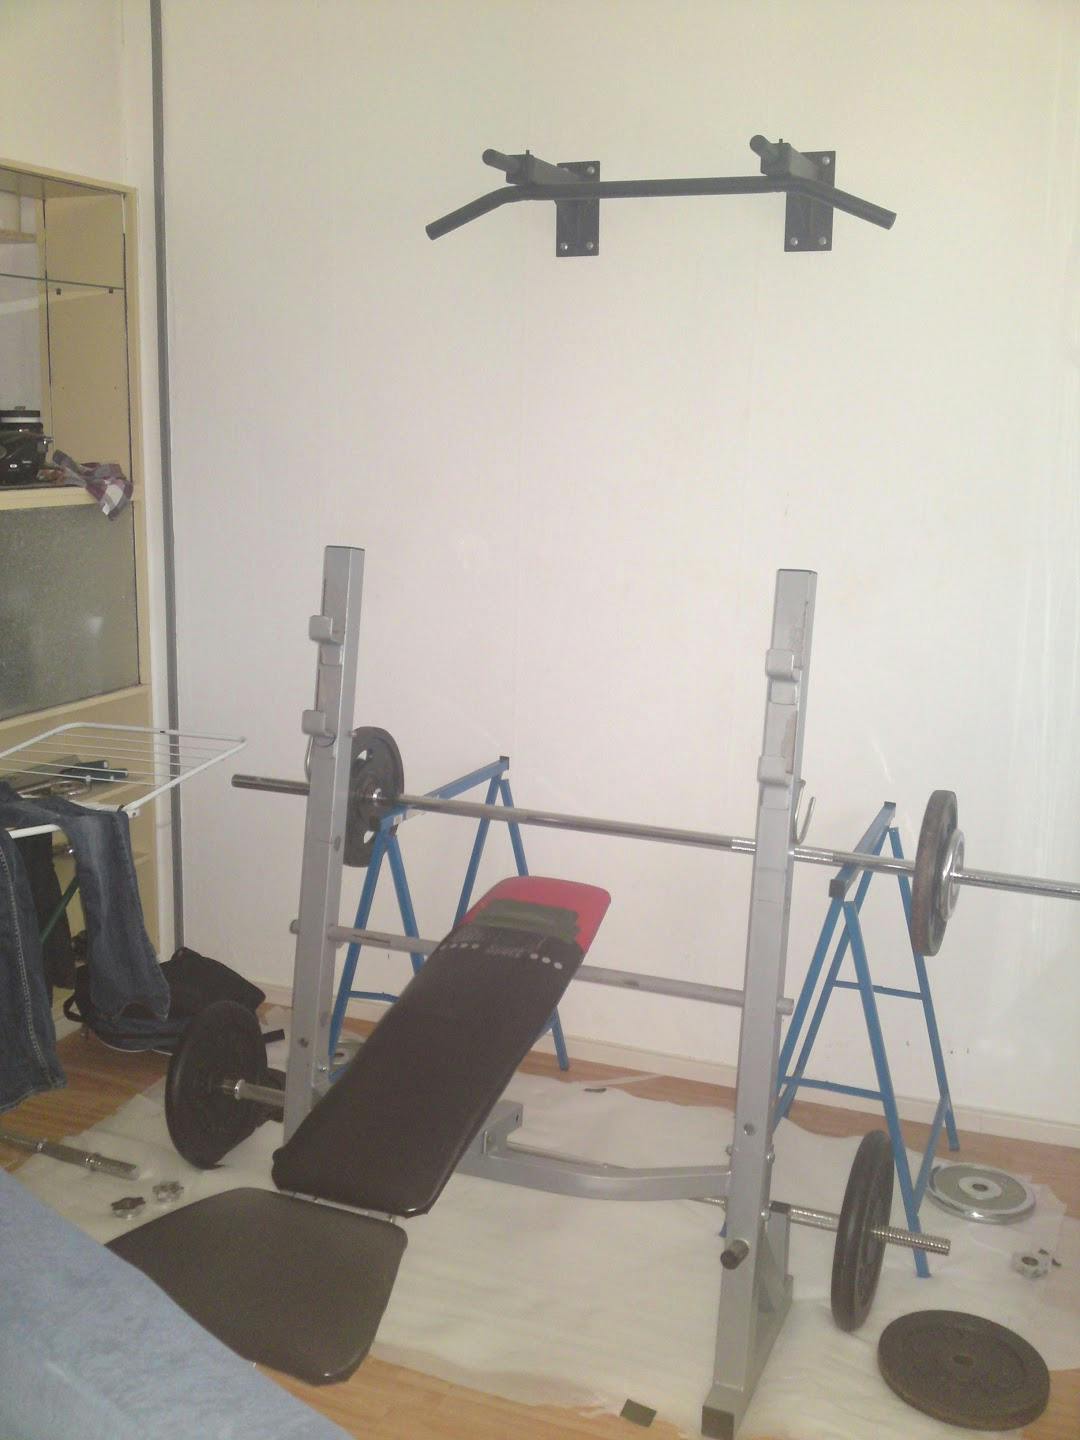 A very rudimentary home gym with a bench, barbells, weights, and a pull up bar